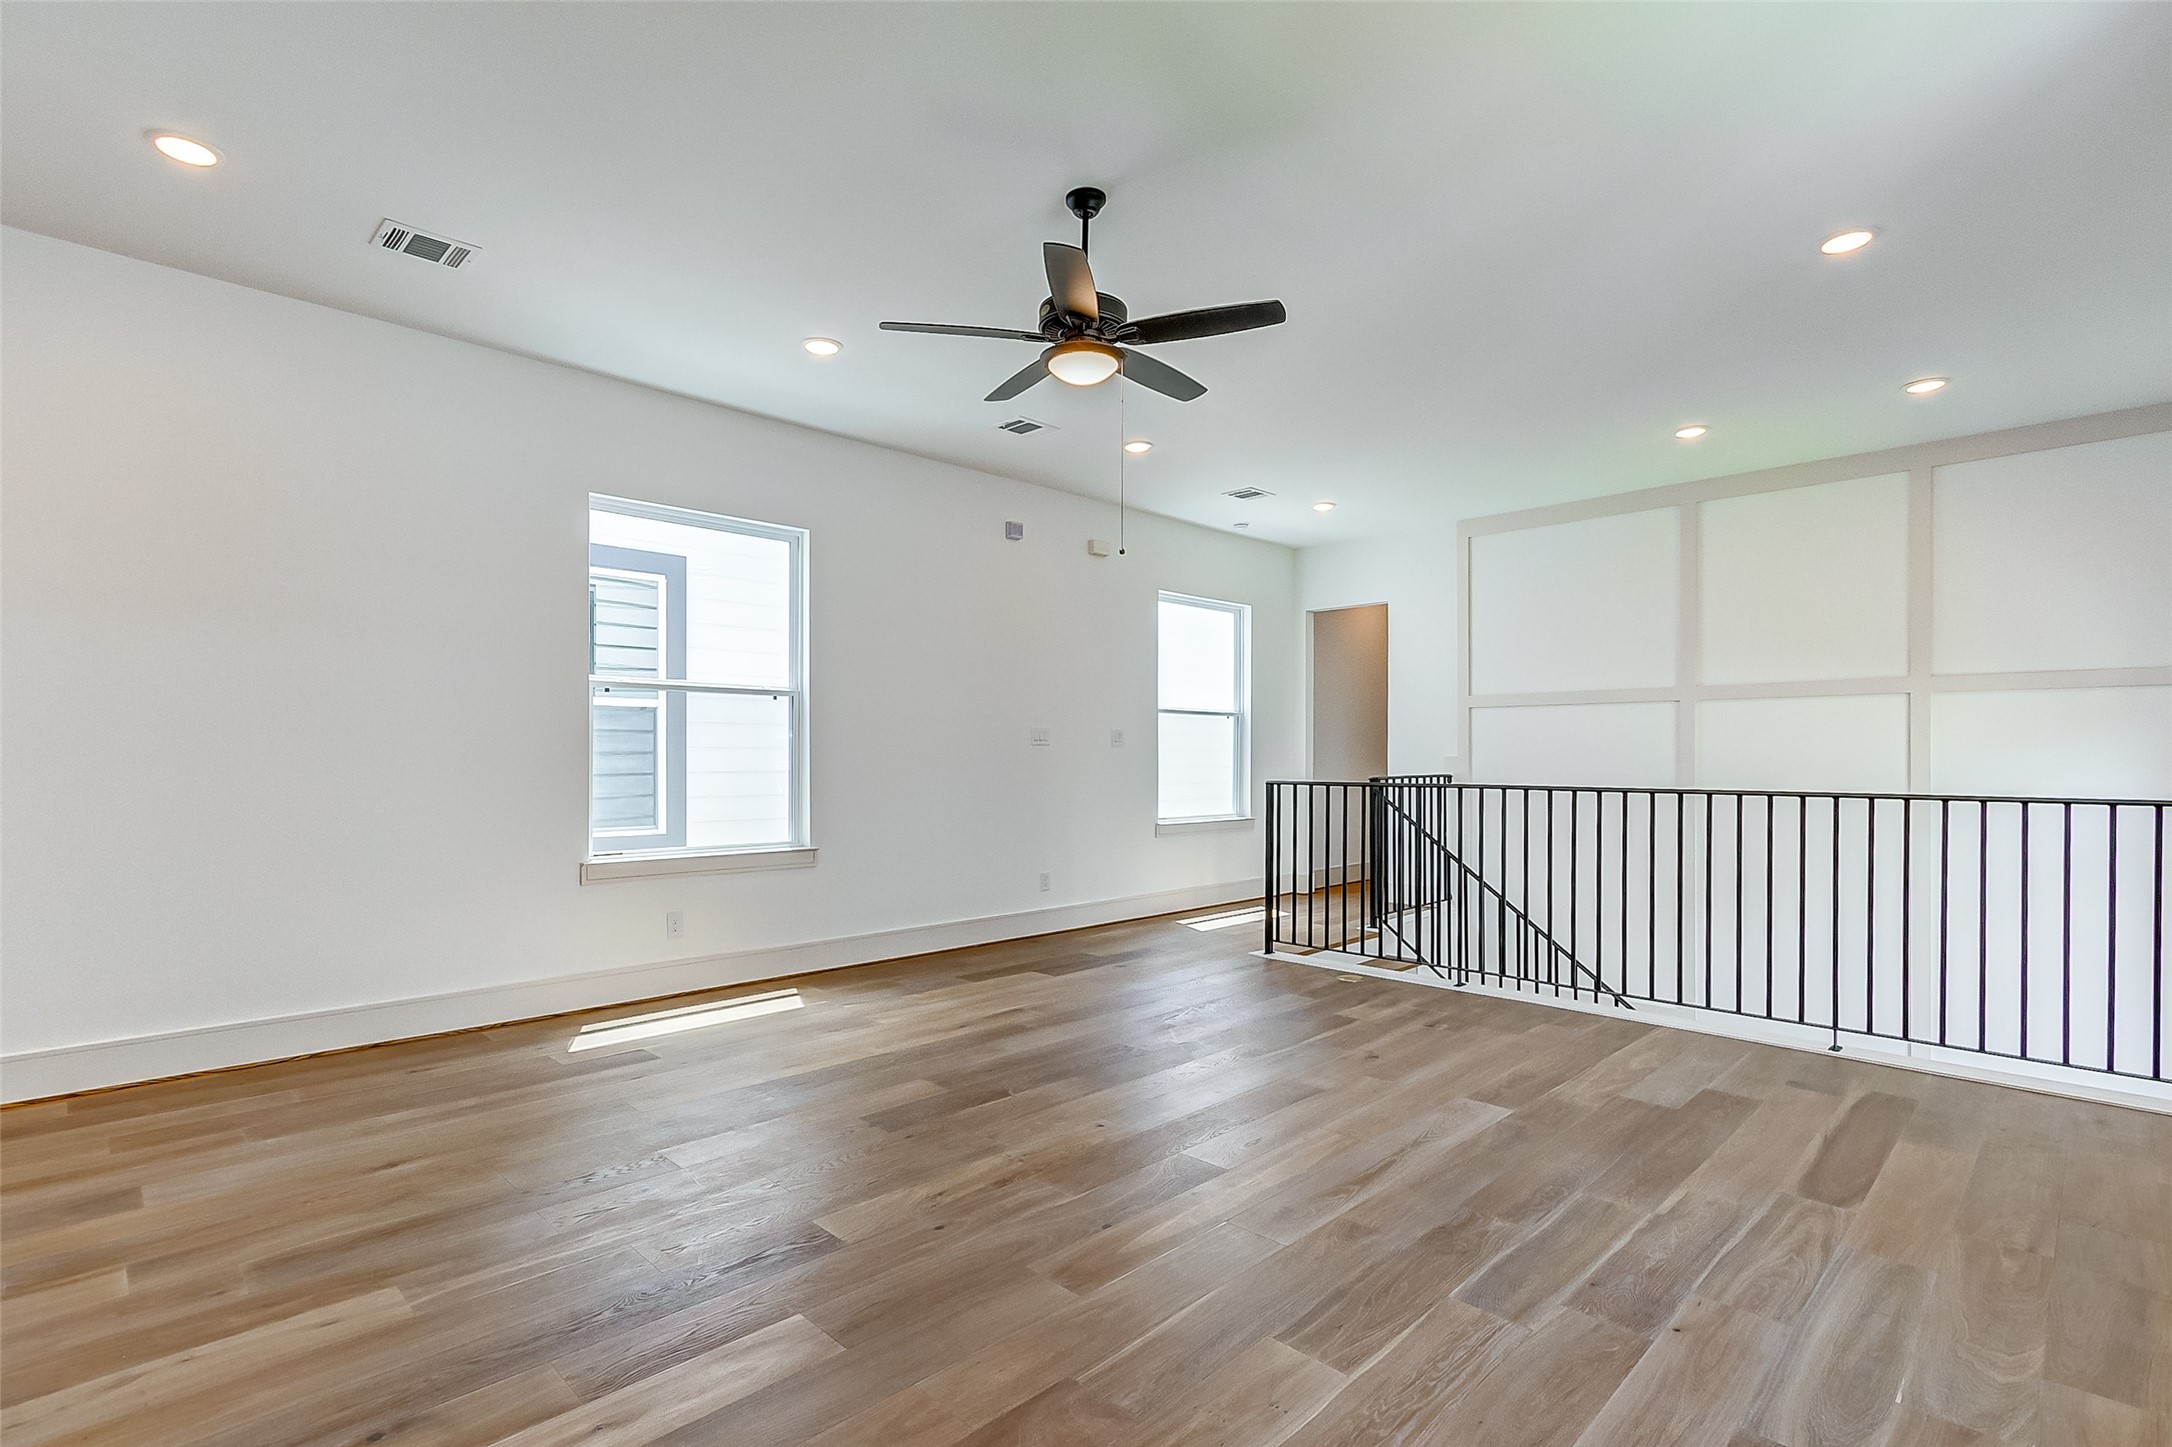 This room can be used as a play room, game room, secondary living space, or home office...the possibilities are endless!